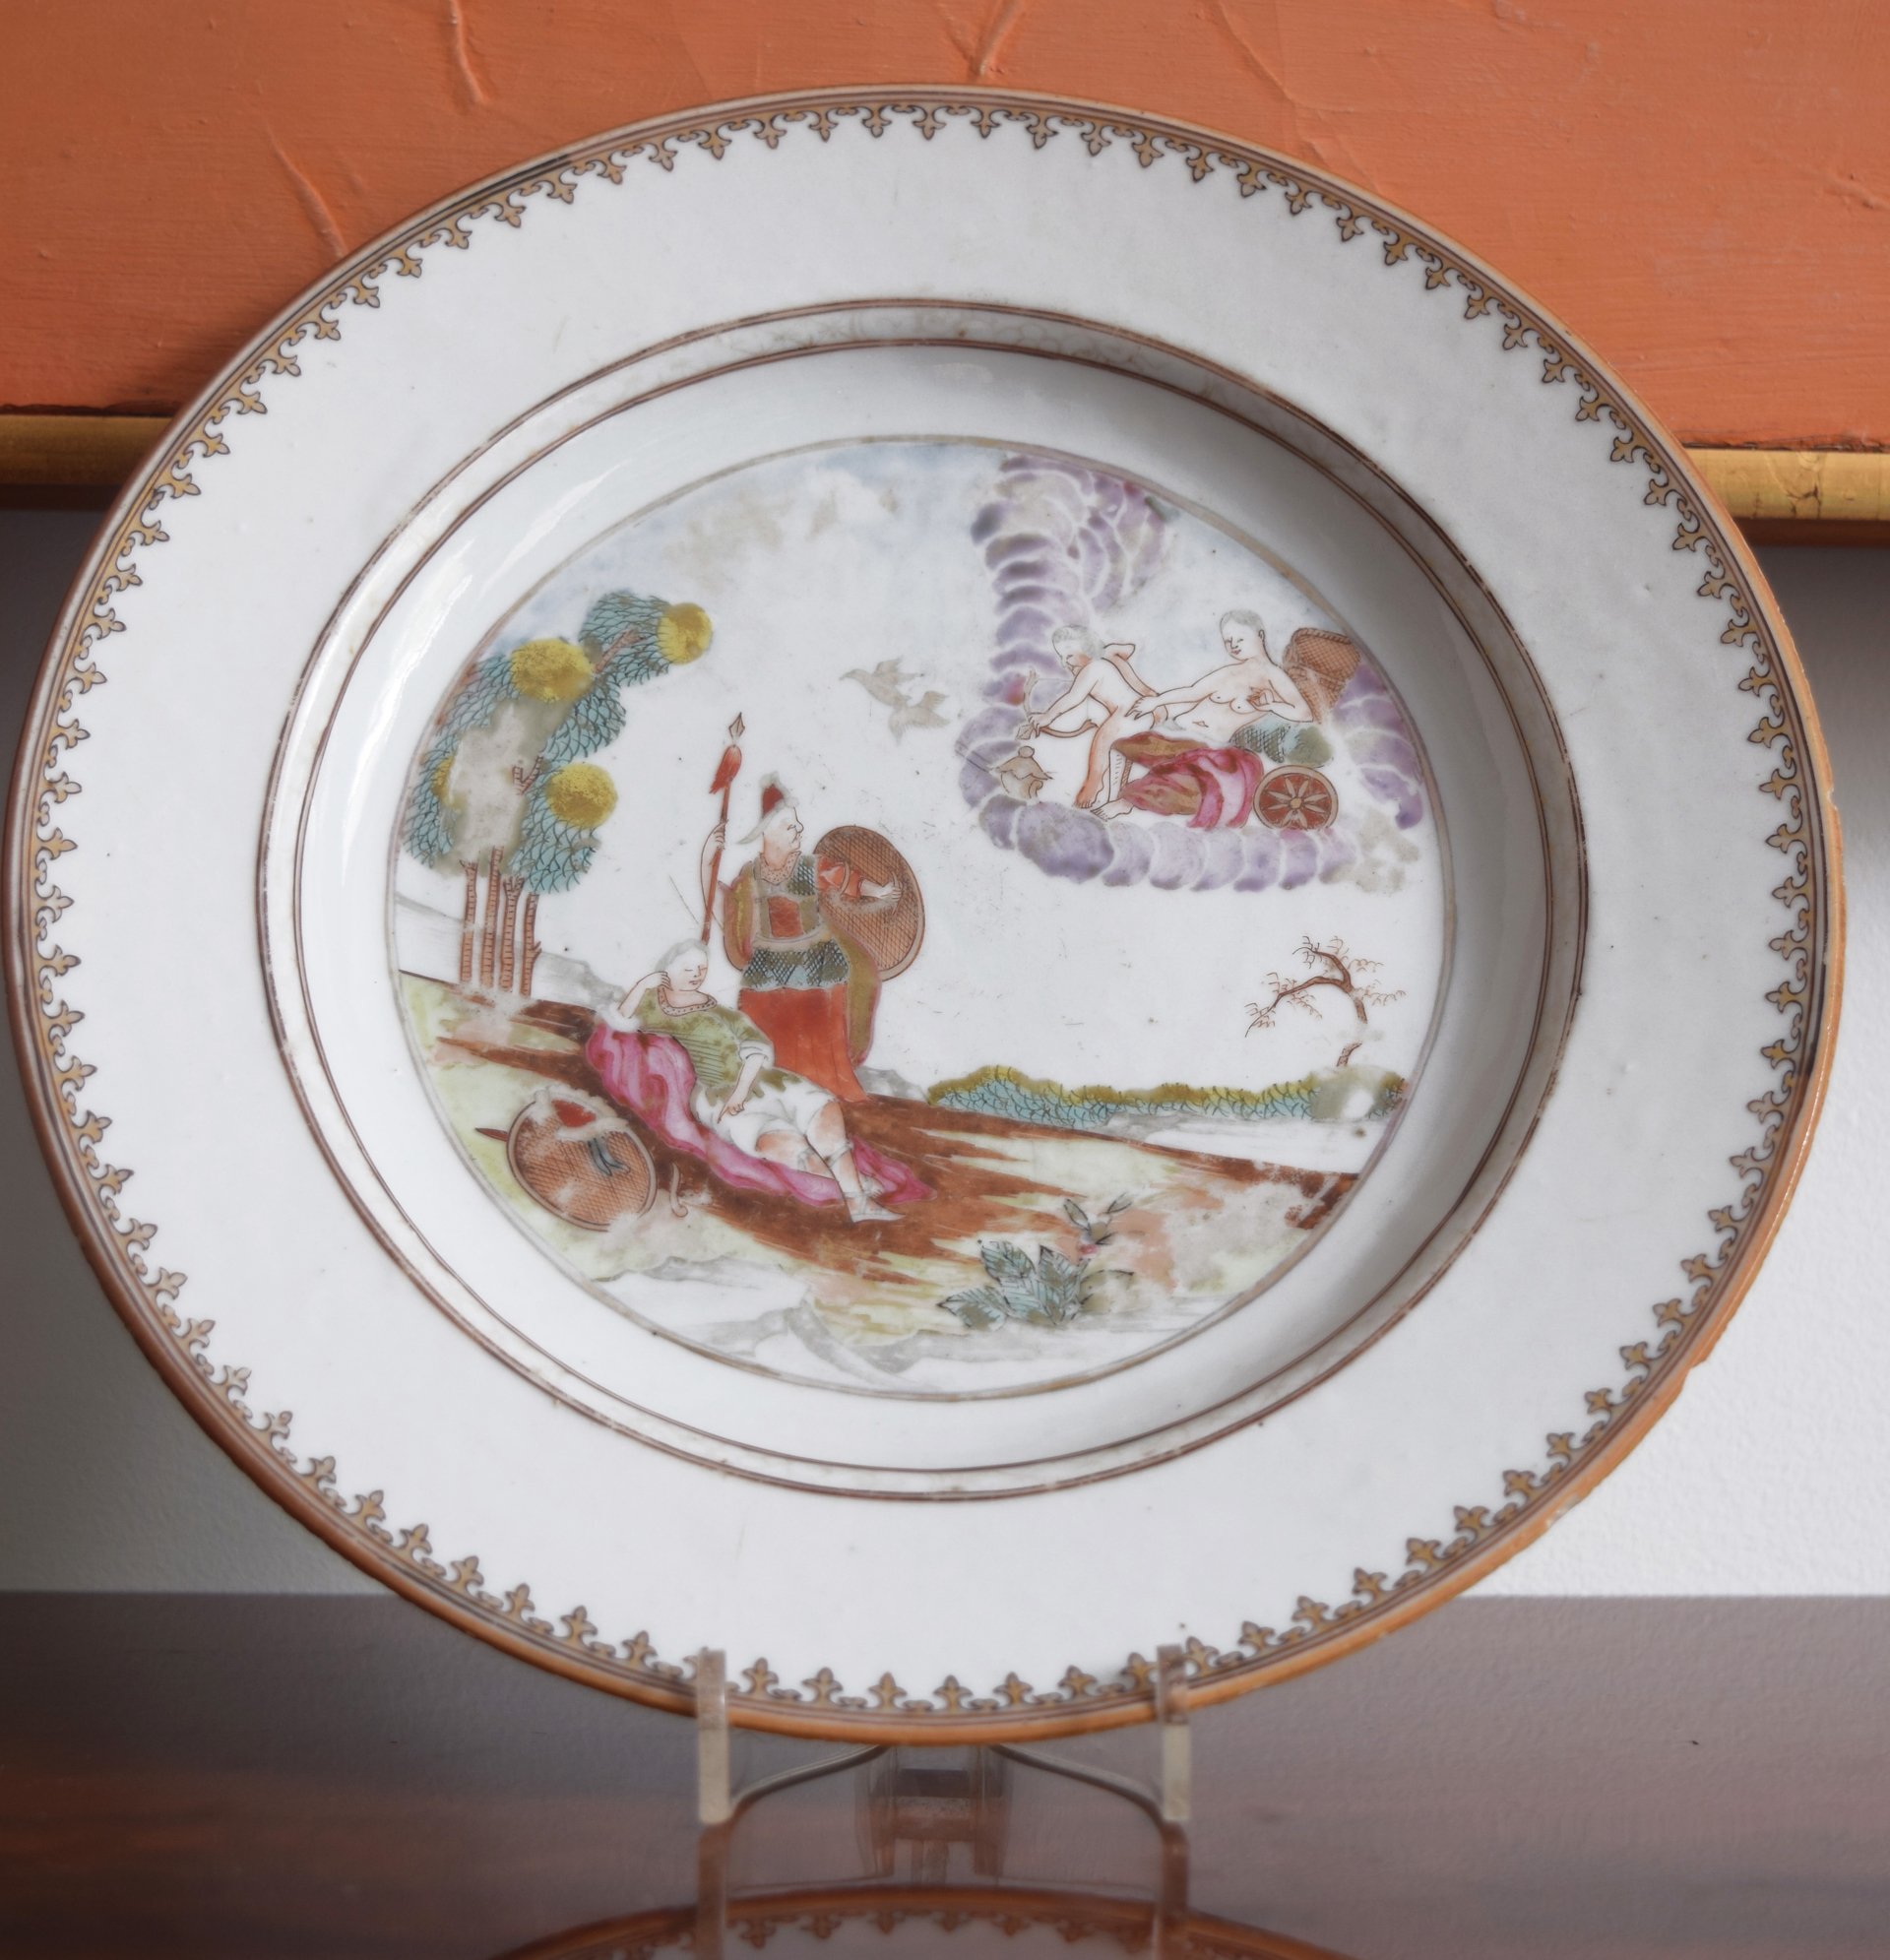 EXPORT PLATE WITH MYTHOLOGICAL SCENE OF VENUS IN HER CHARIOT SURROUNDED BY CLOUDS